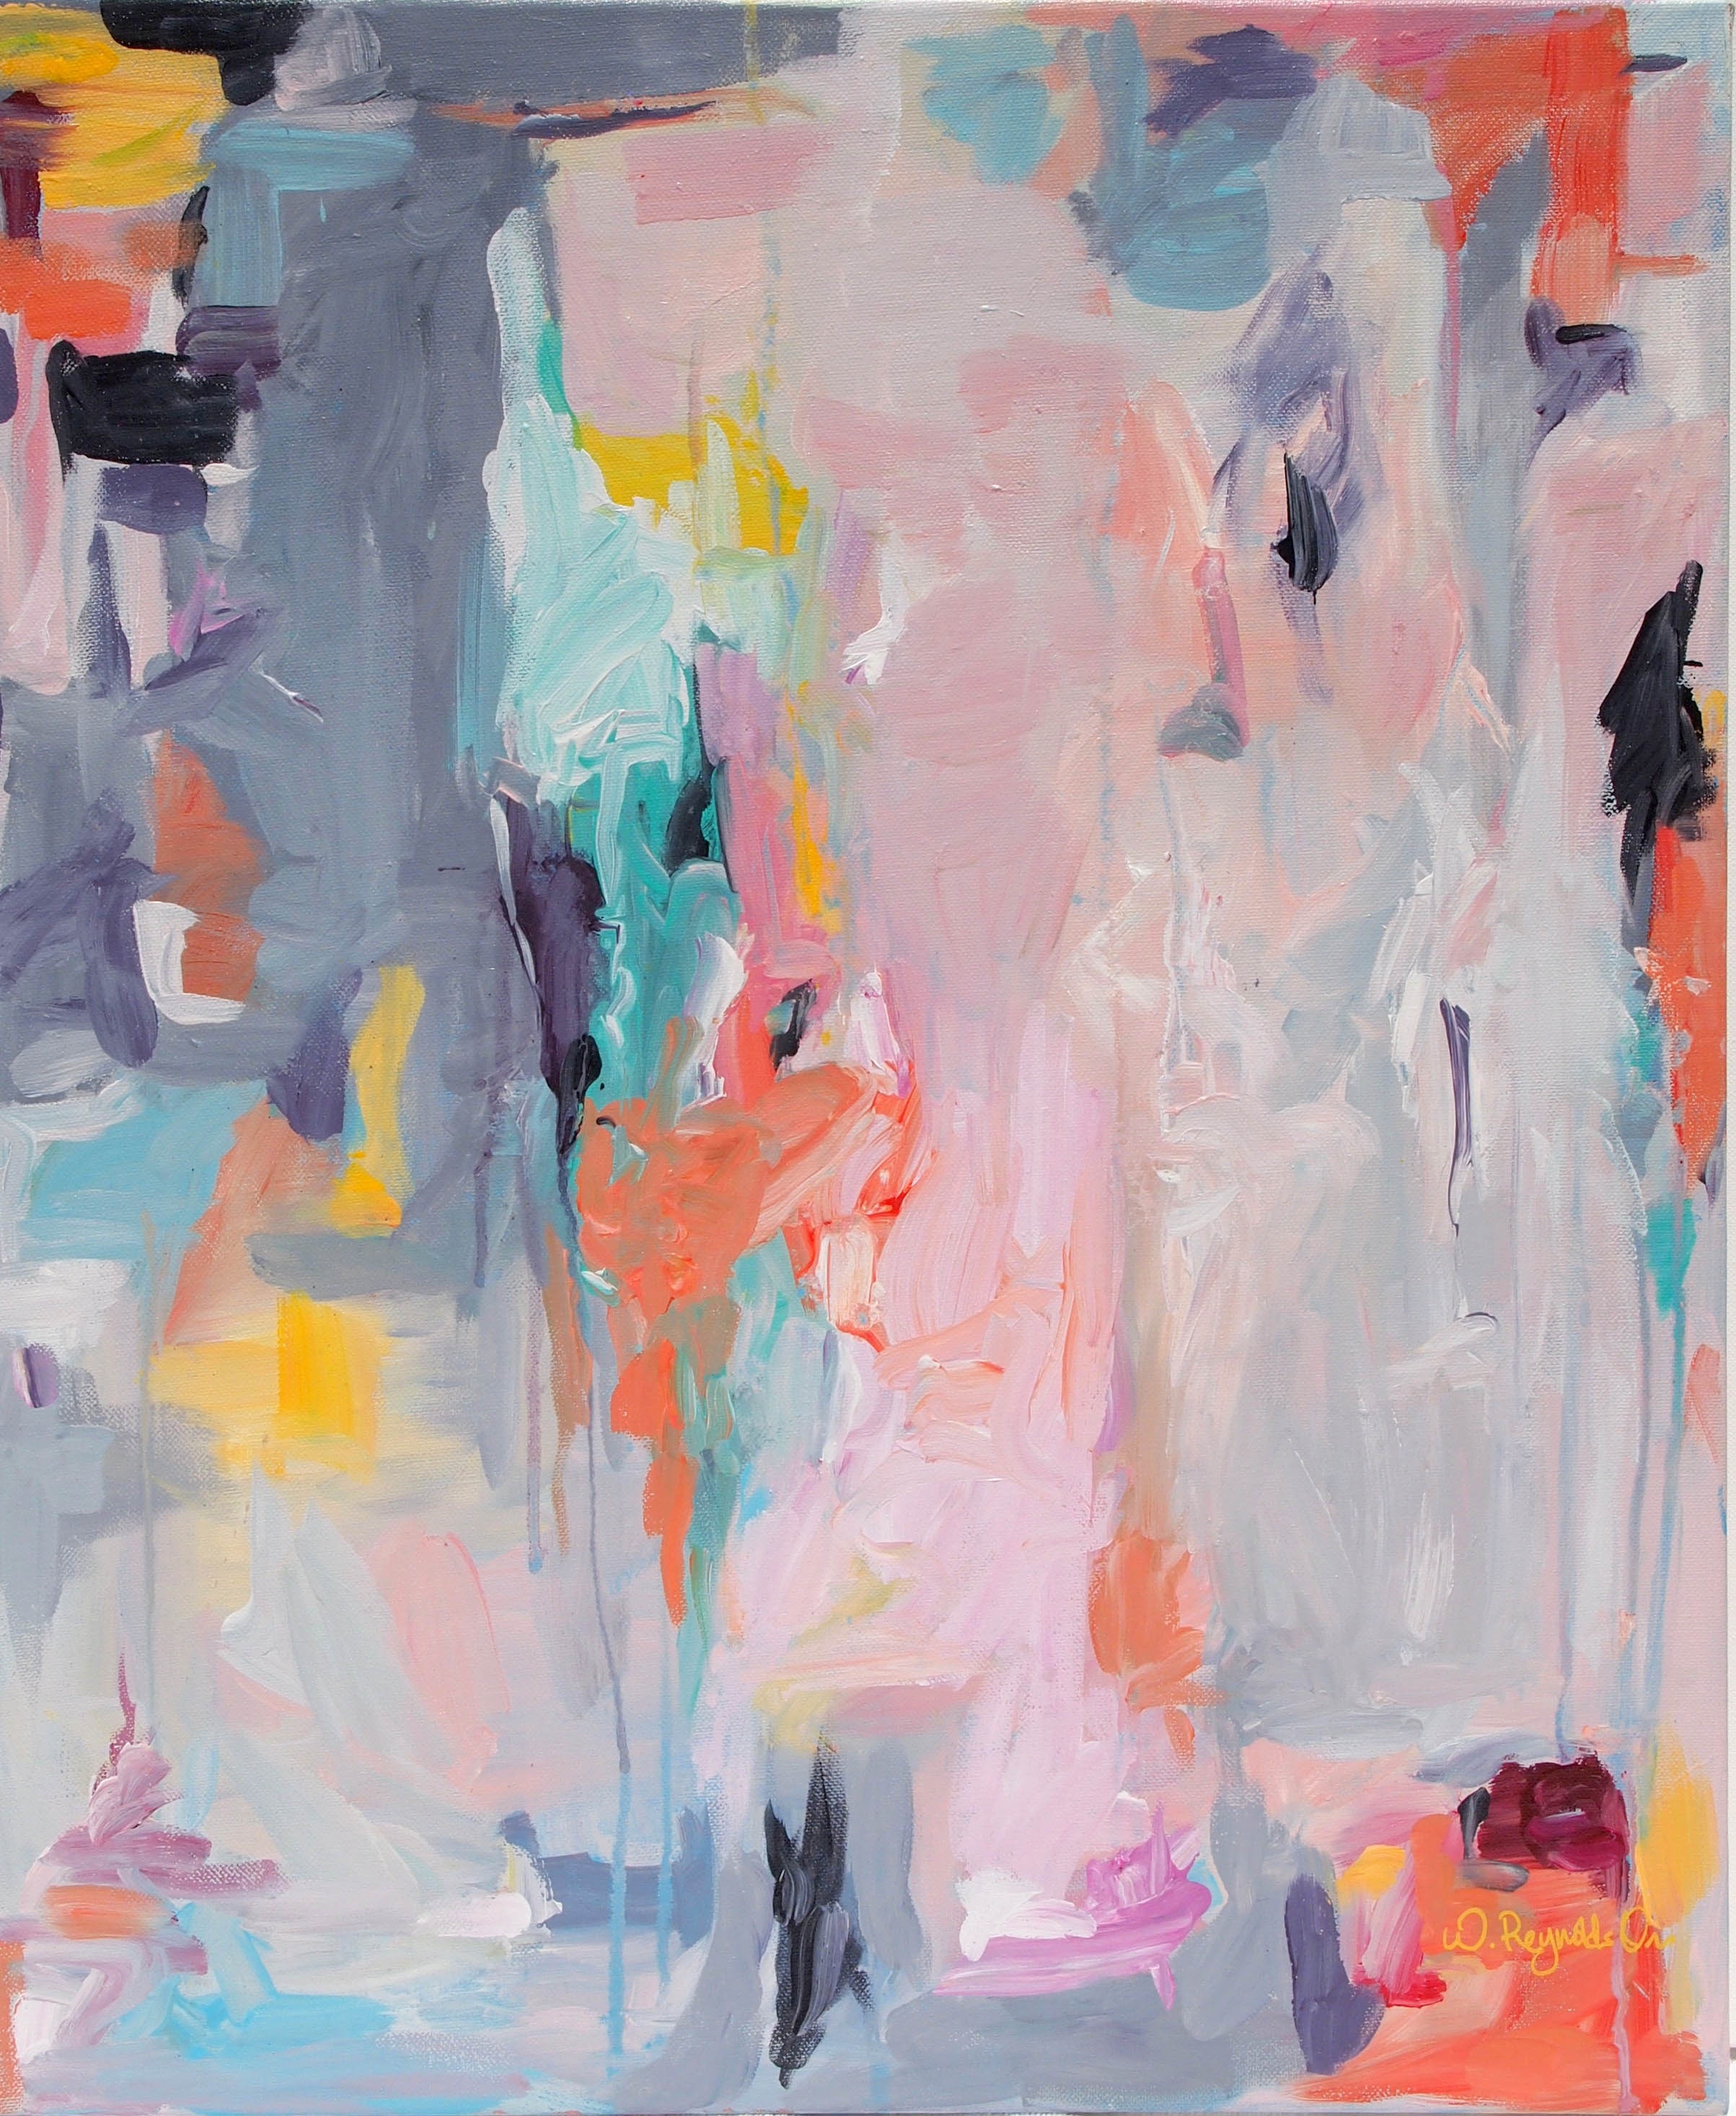 Featured: Whitney Orr, Painter